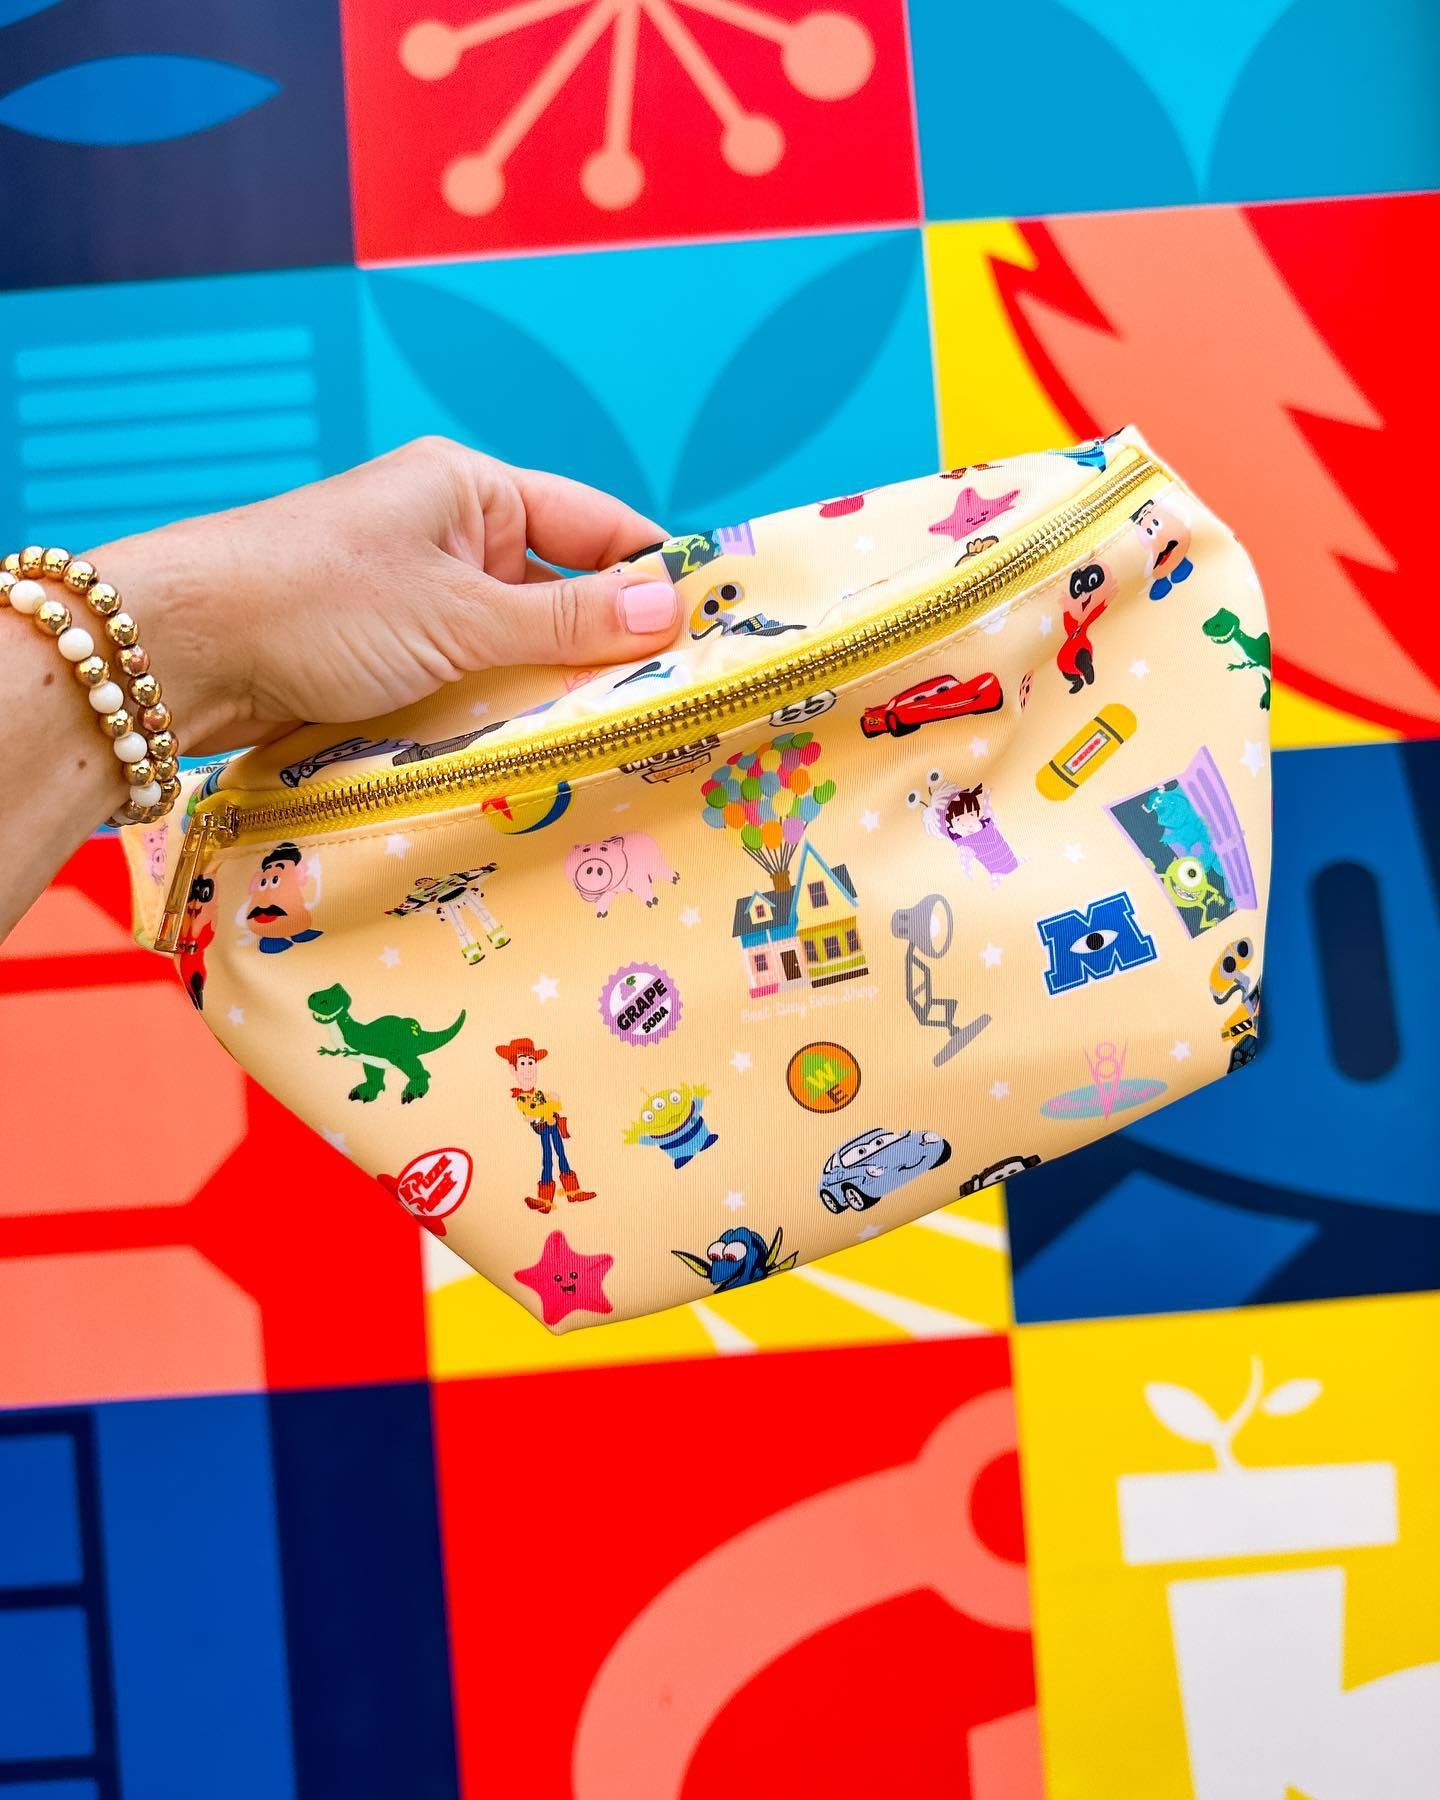 Shop the newest Pixar collection, available now! These would be so perfect for Pixar Fest at Disney California Adventure or just Pixar Pier! Shop now.